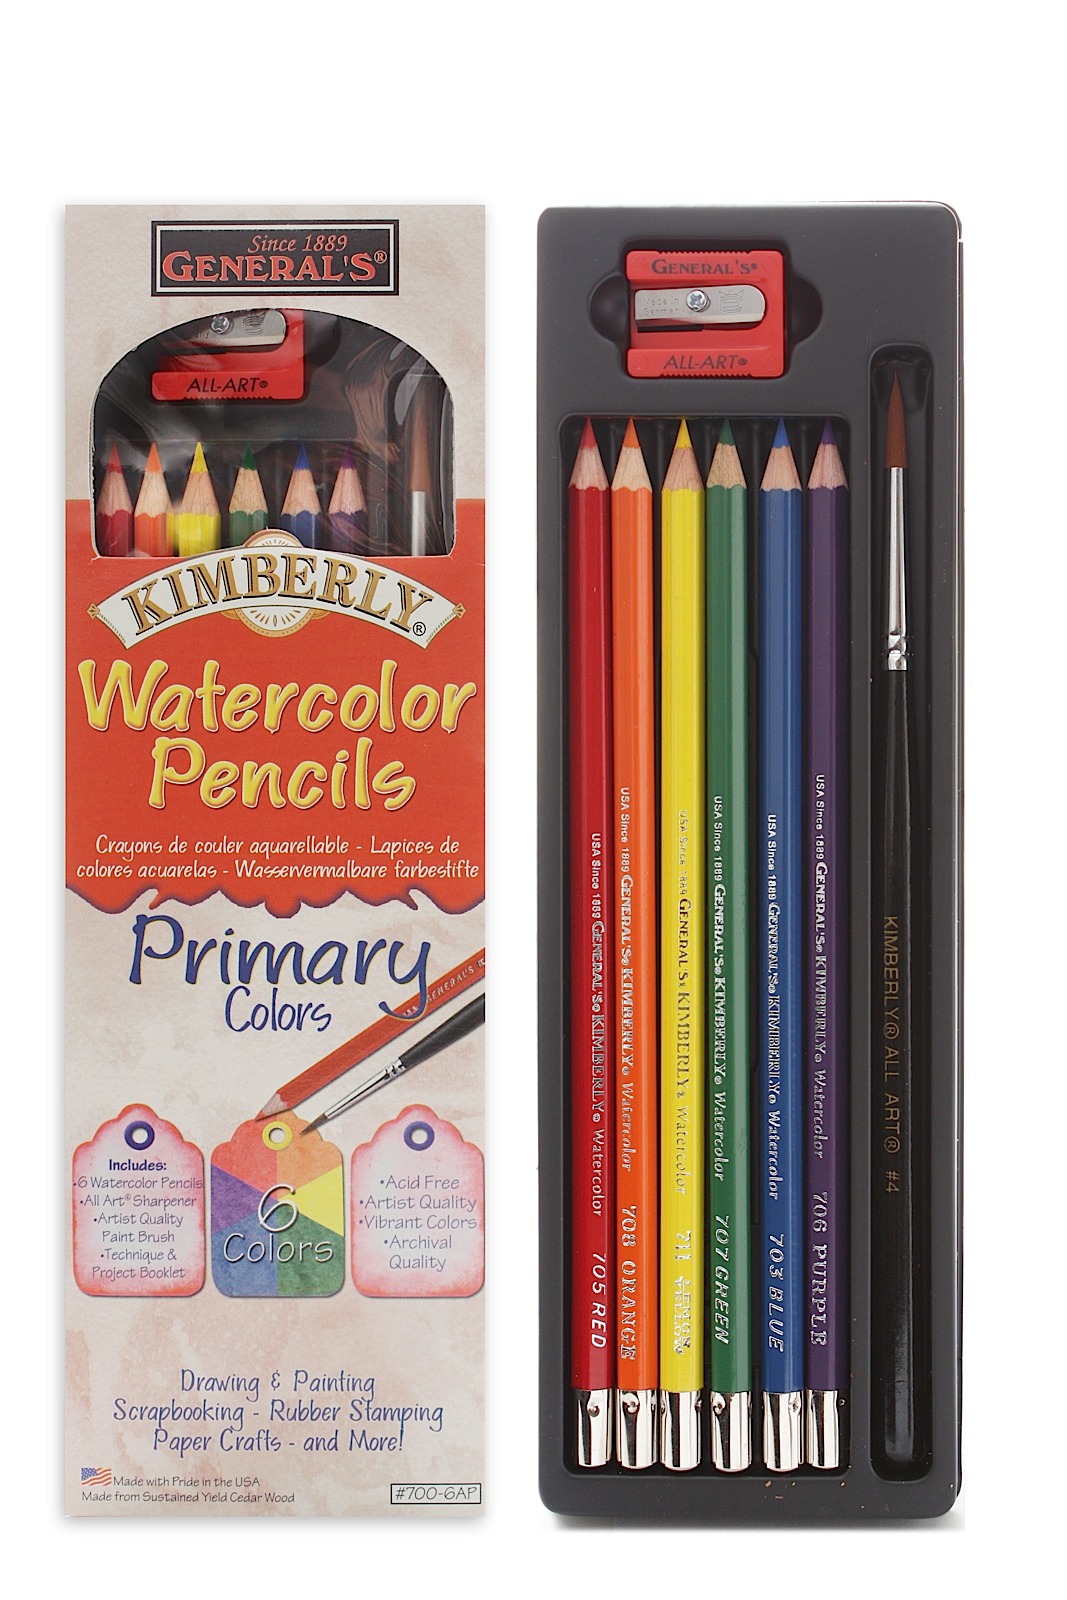 General's - Kimberly Watercolor Pencils - Primary Colors Set